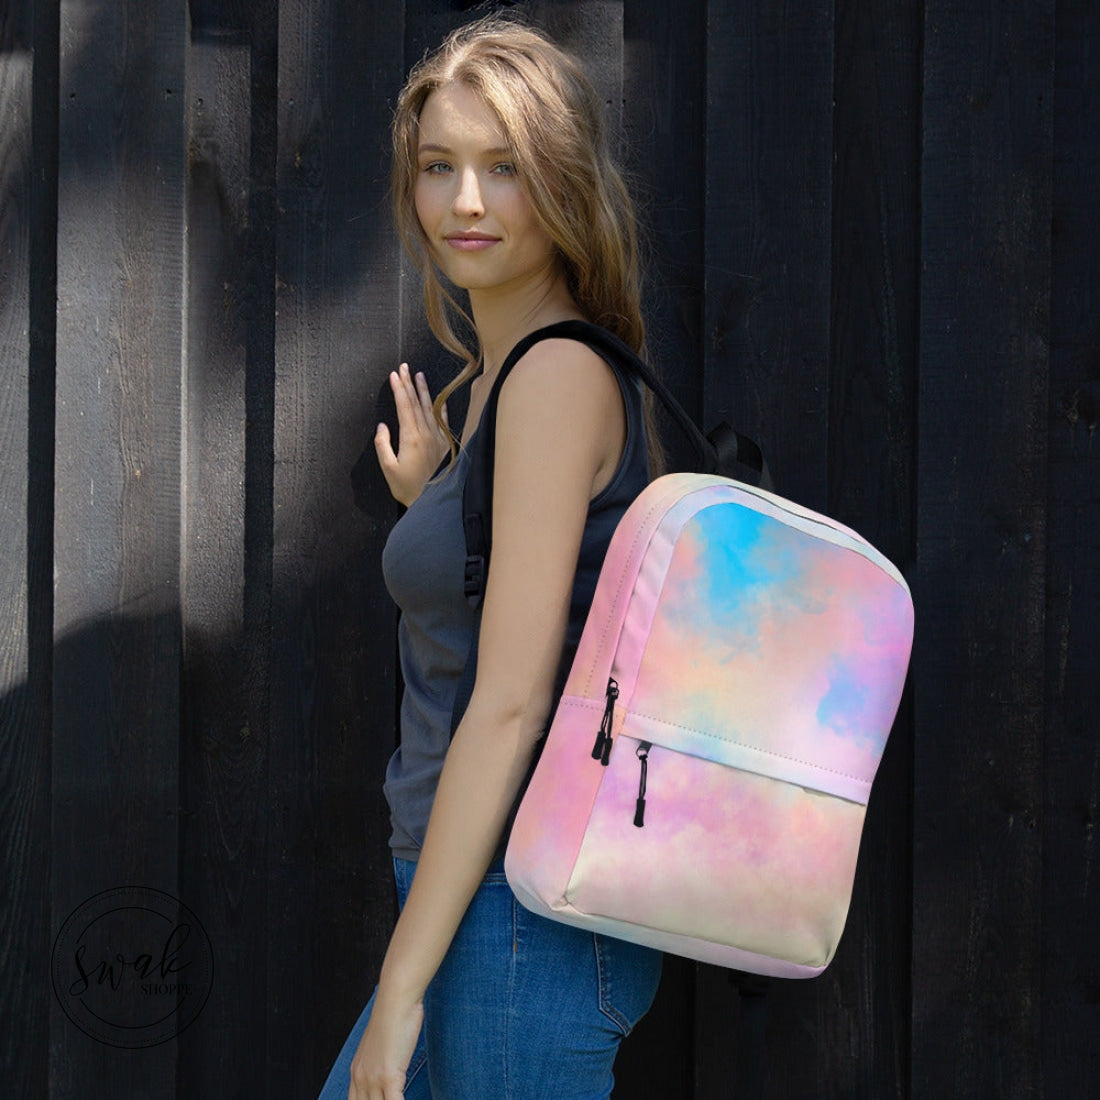 Love Rainbow Cloud Backpack With Pocket